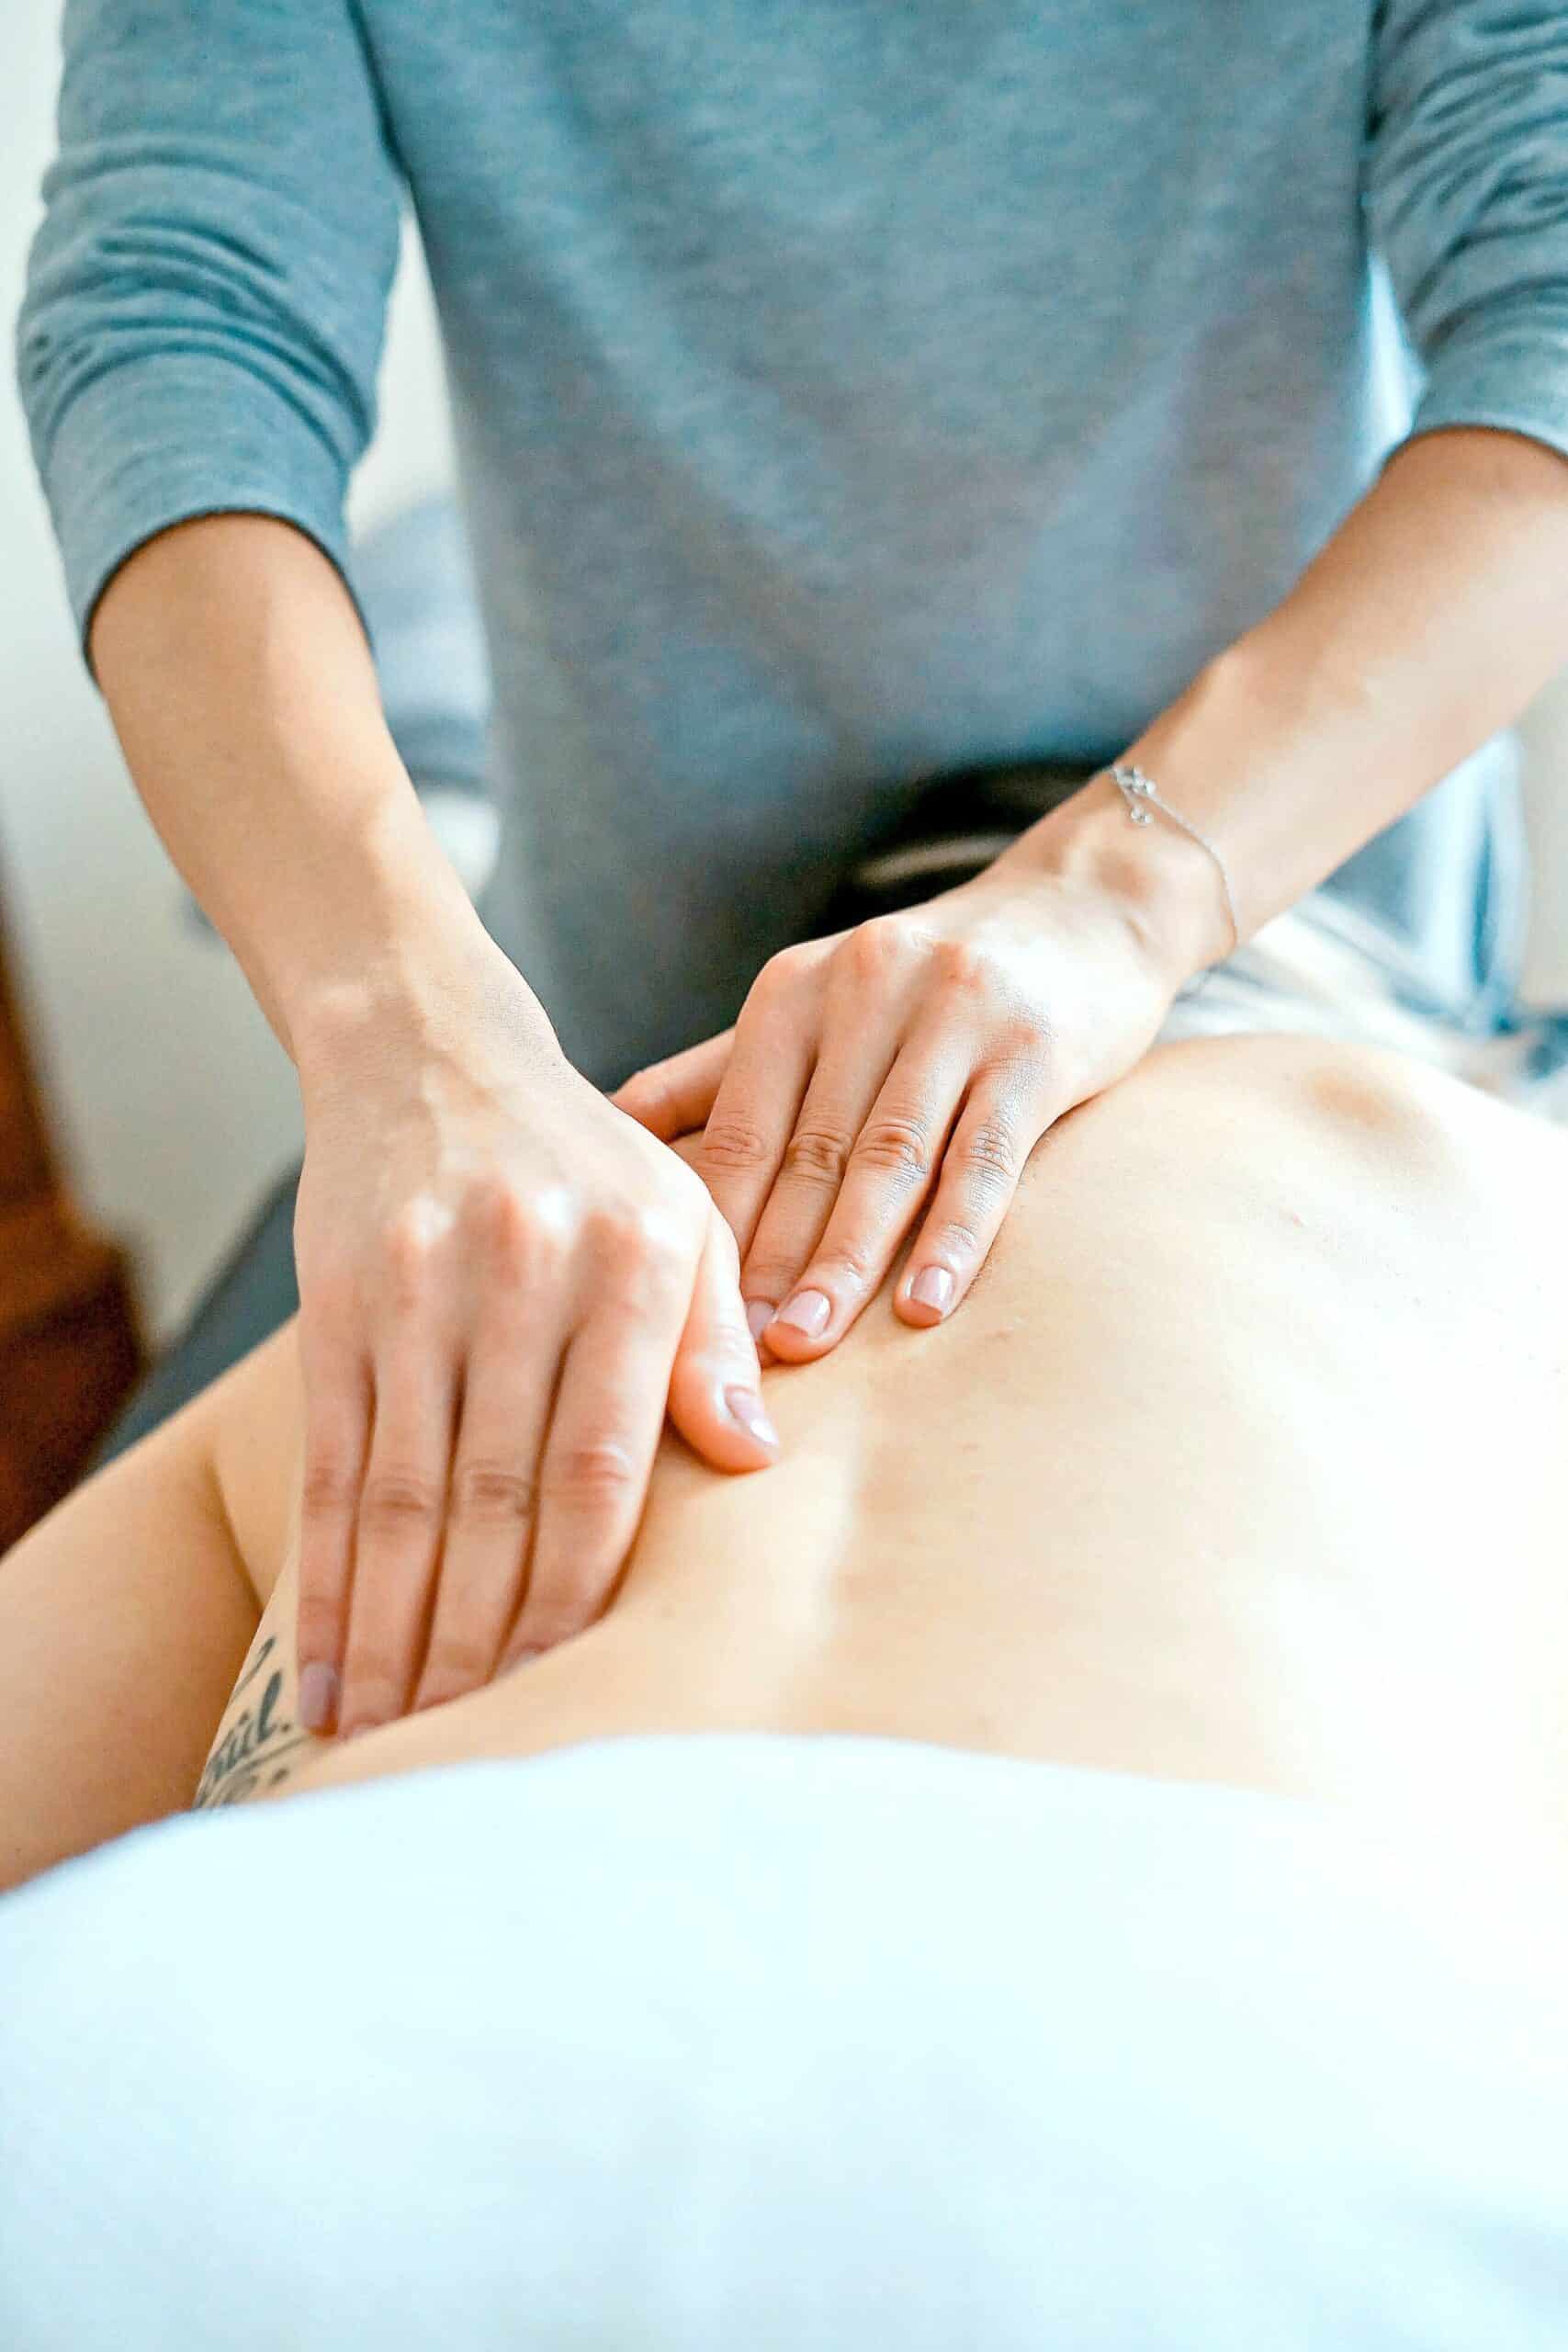 A woman giving someone a back massage as a Christmas gift